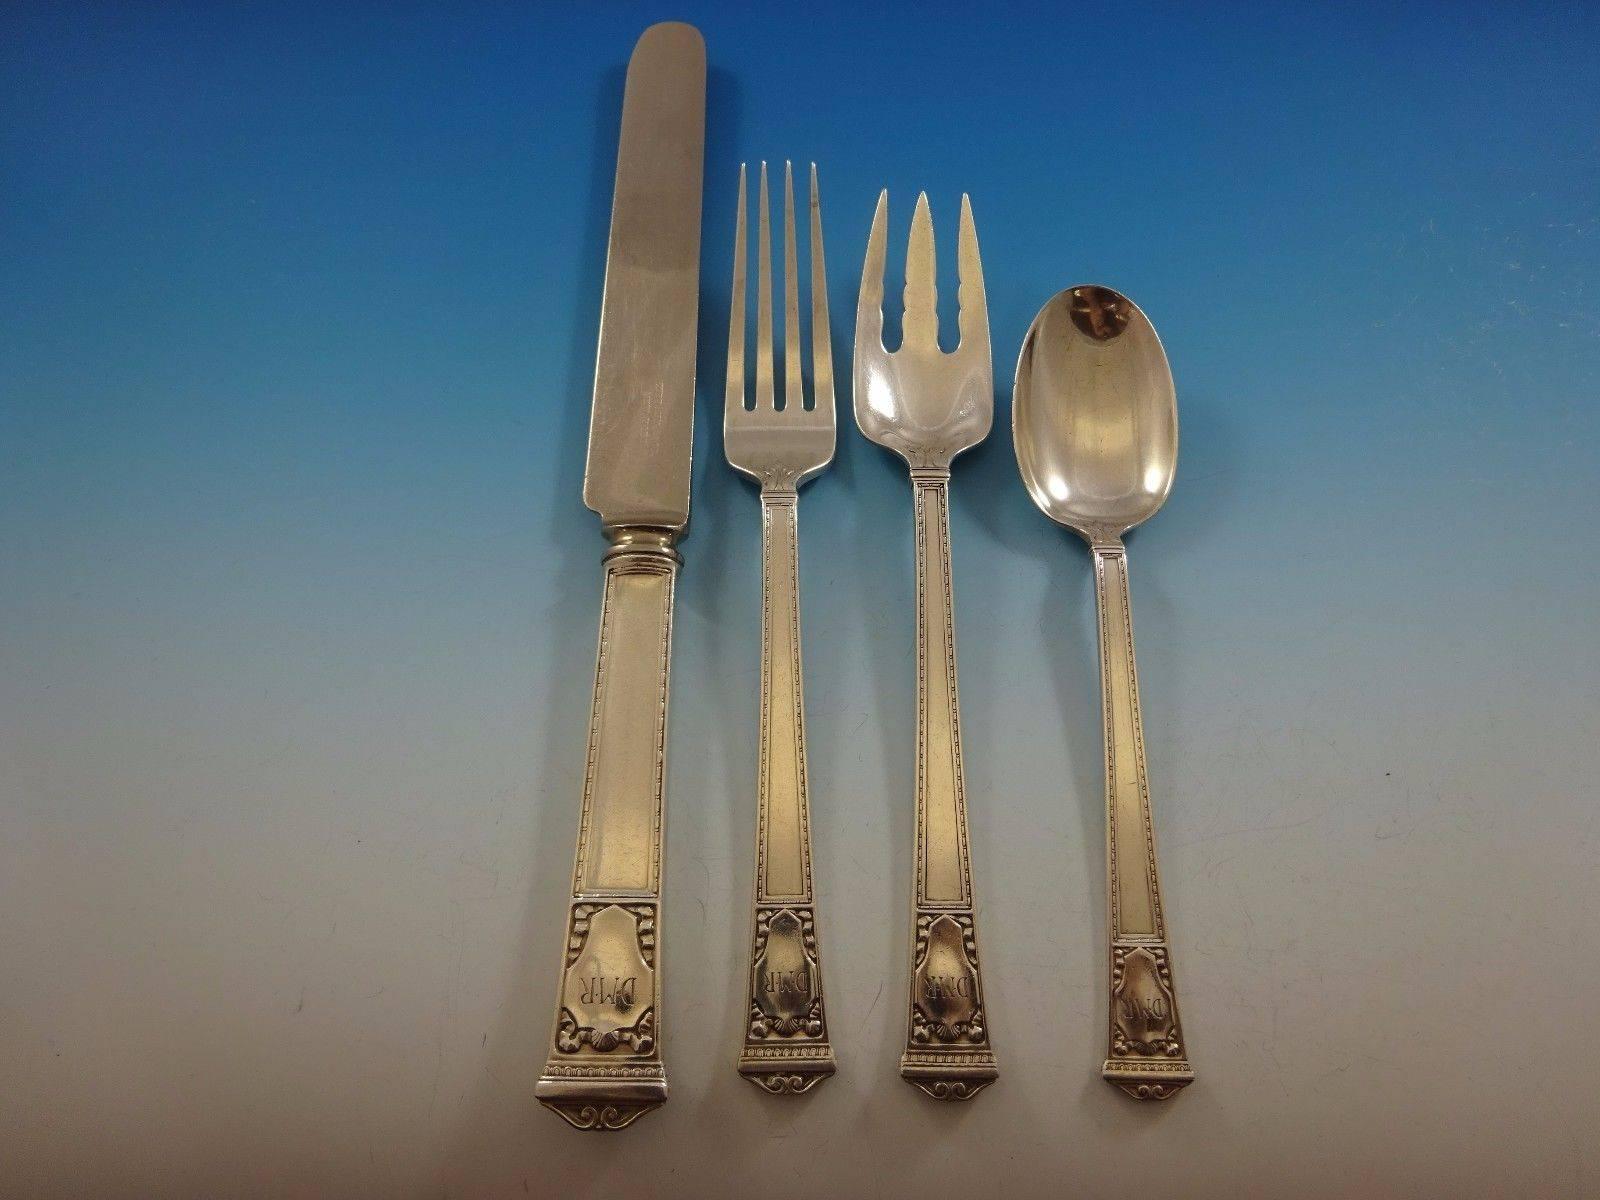 San Lorenzo by Tiffany & Co. Sterling silver flatware set - 131 pieces. This set includes: 12 knives, 9 3/8", 12 dinner forks, 7", 12 teaspoons, 6", 12 flat handle butter spreaders, 6", 12 bouillon spoons, 5 3/8", 12